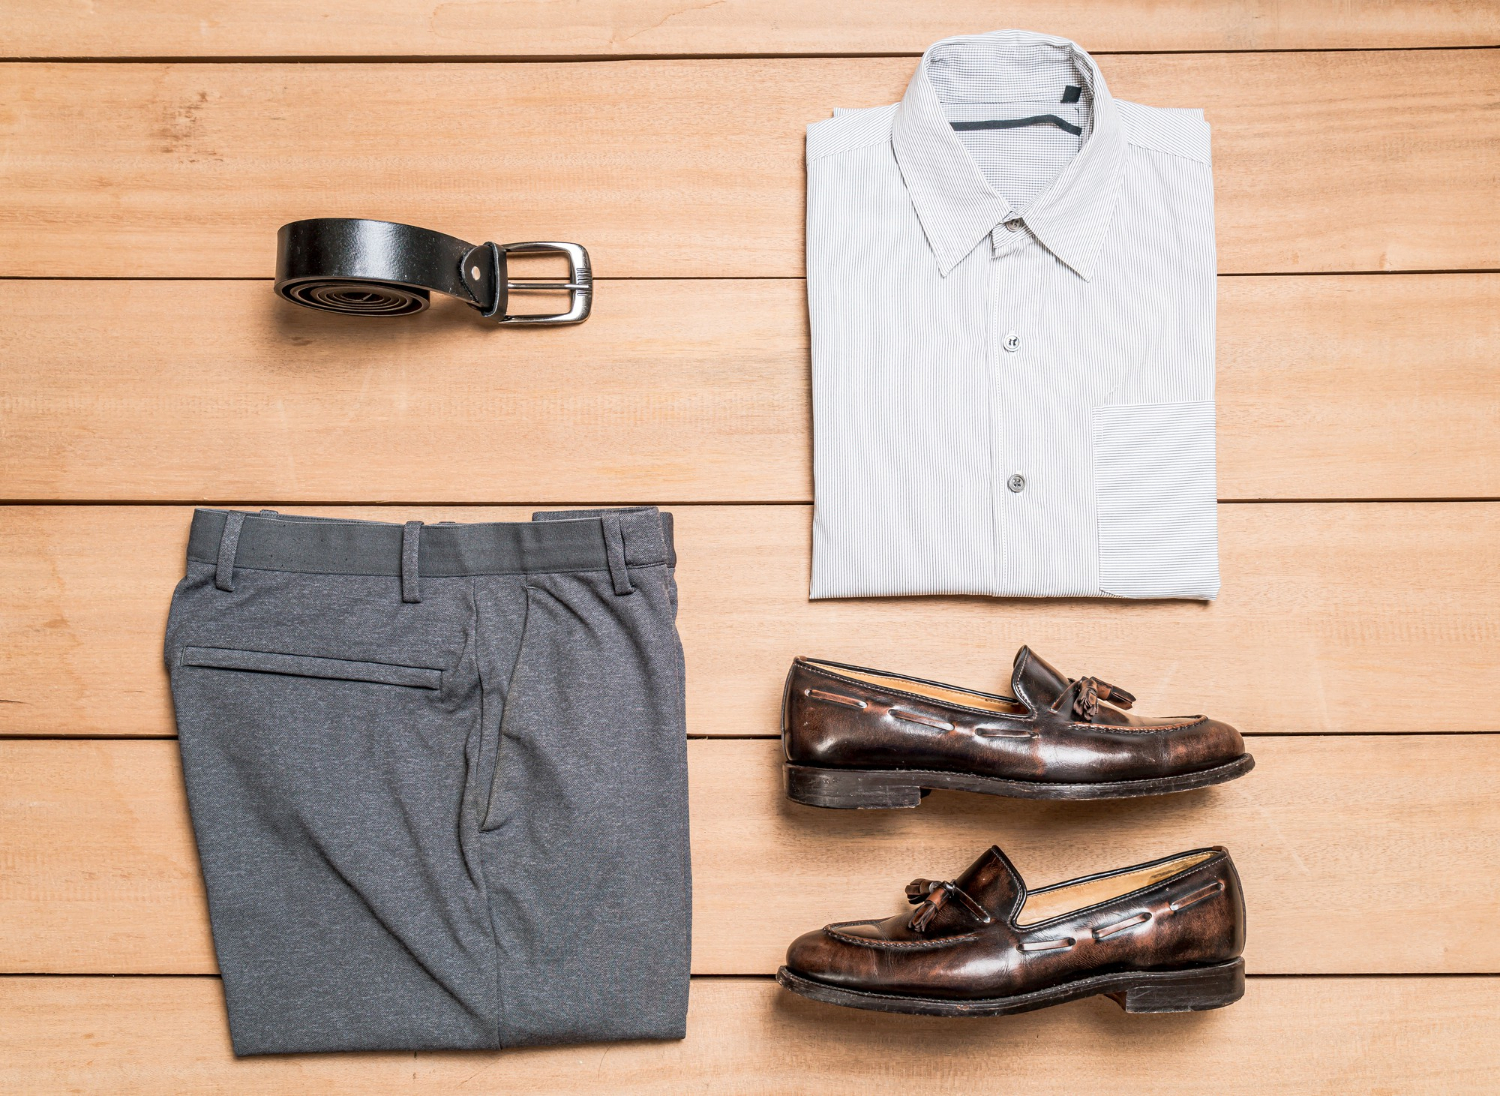 Set of casual clothes with white shirt, gray pants, brown shoes and belt